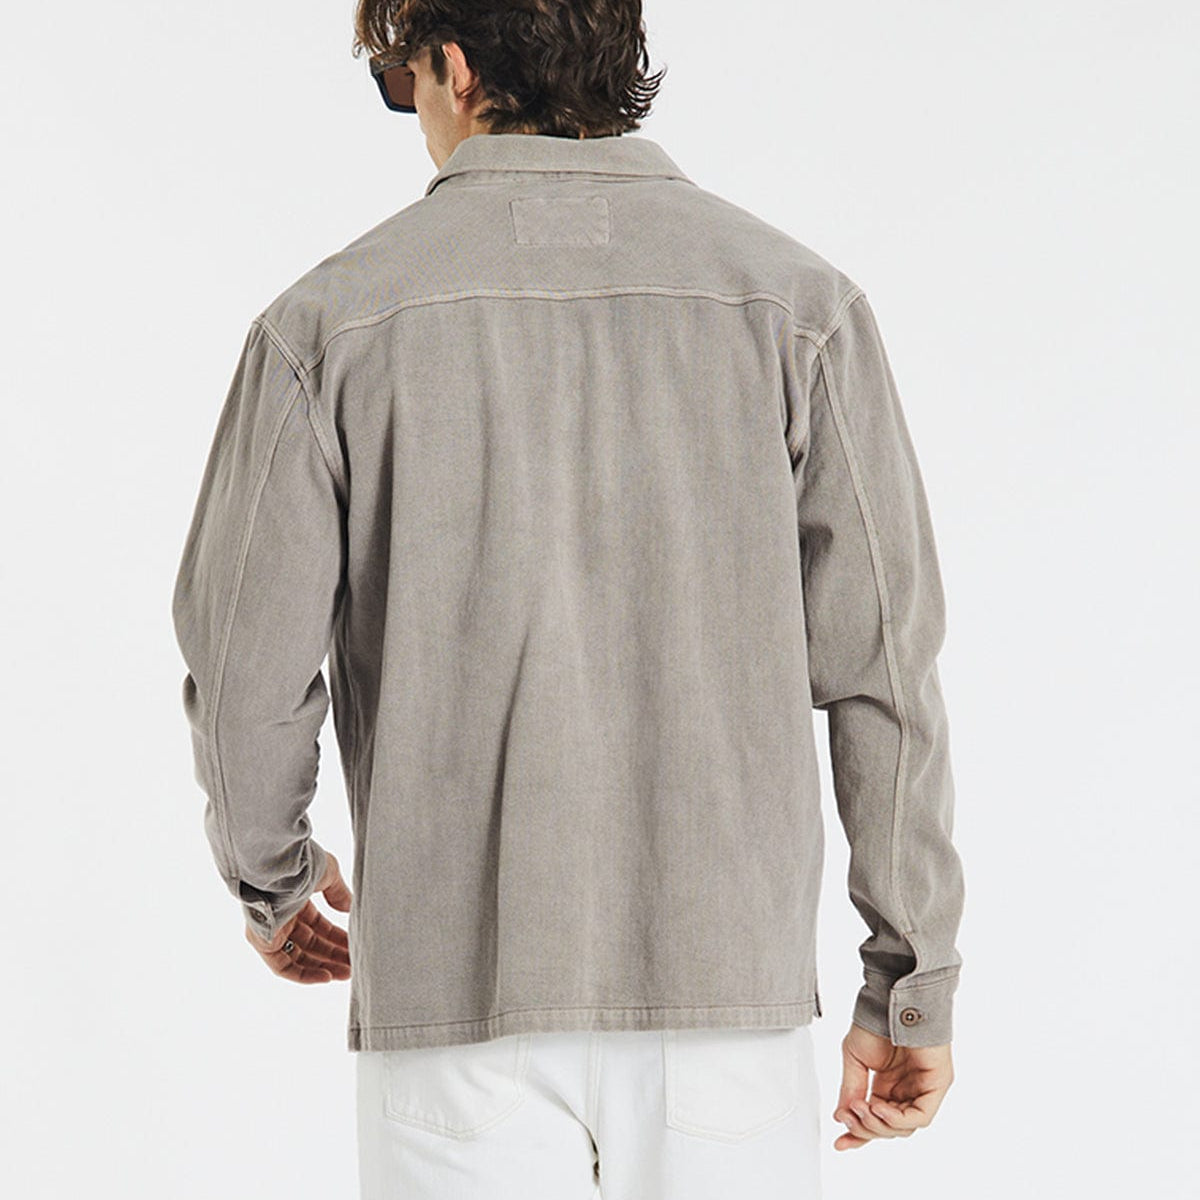 Boxcar Over Shirt Pigment Mocha Neutral – Neverland Store